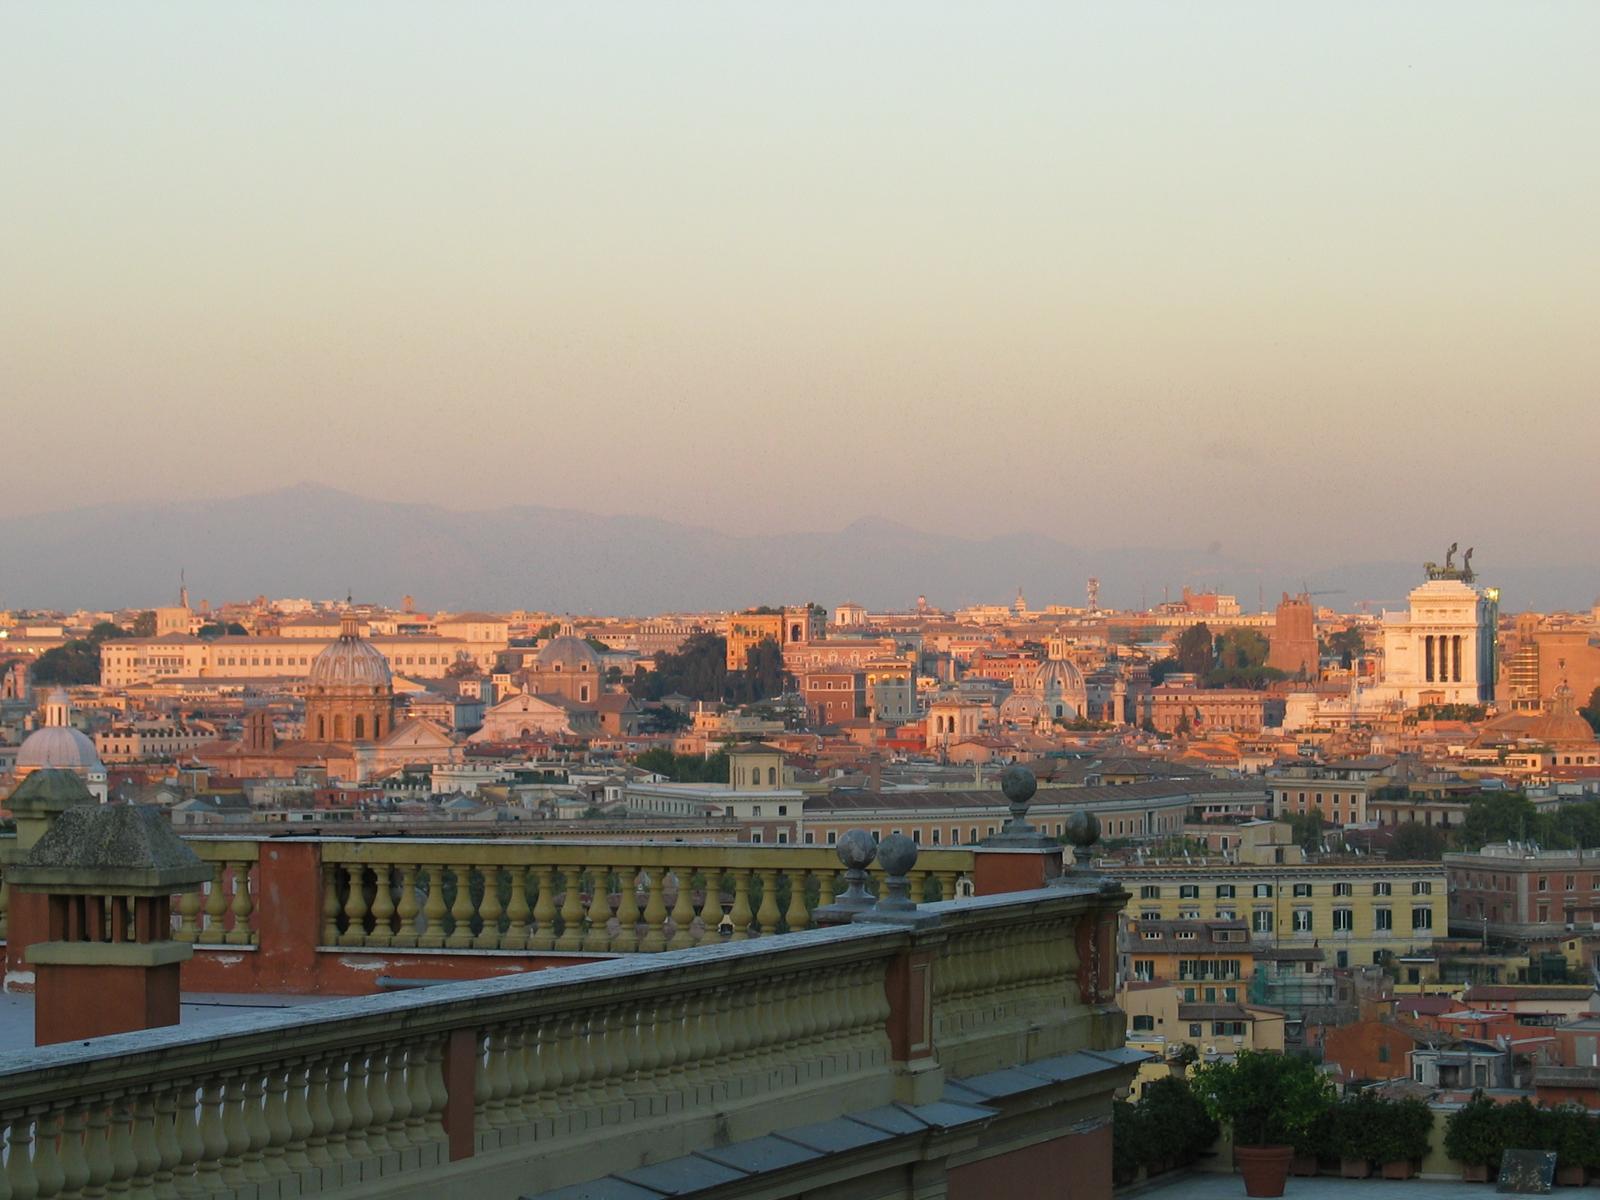 The view from Janiculum Hill